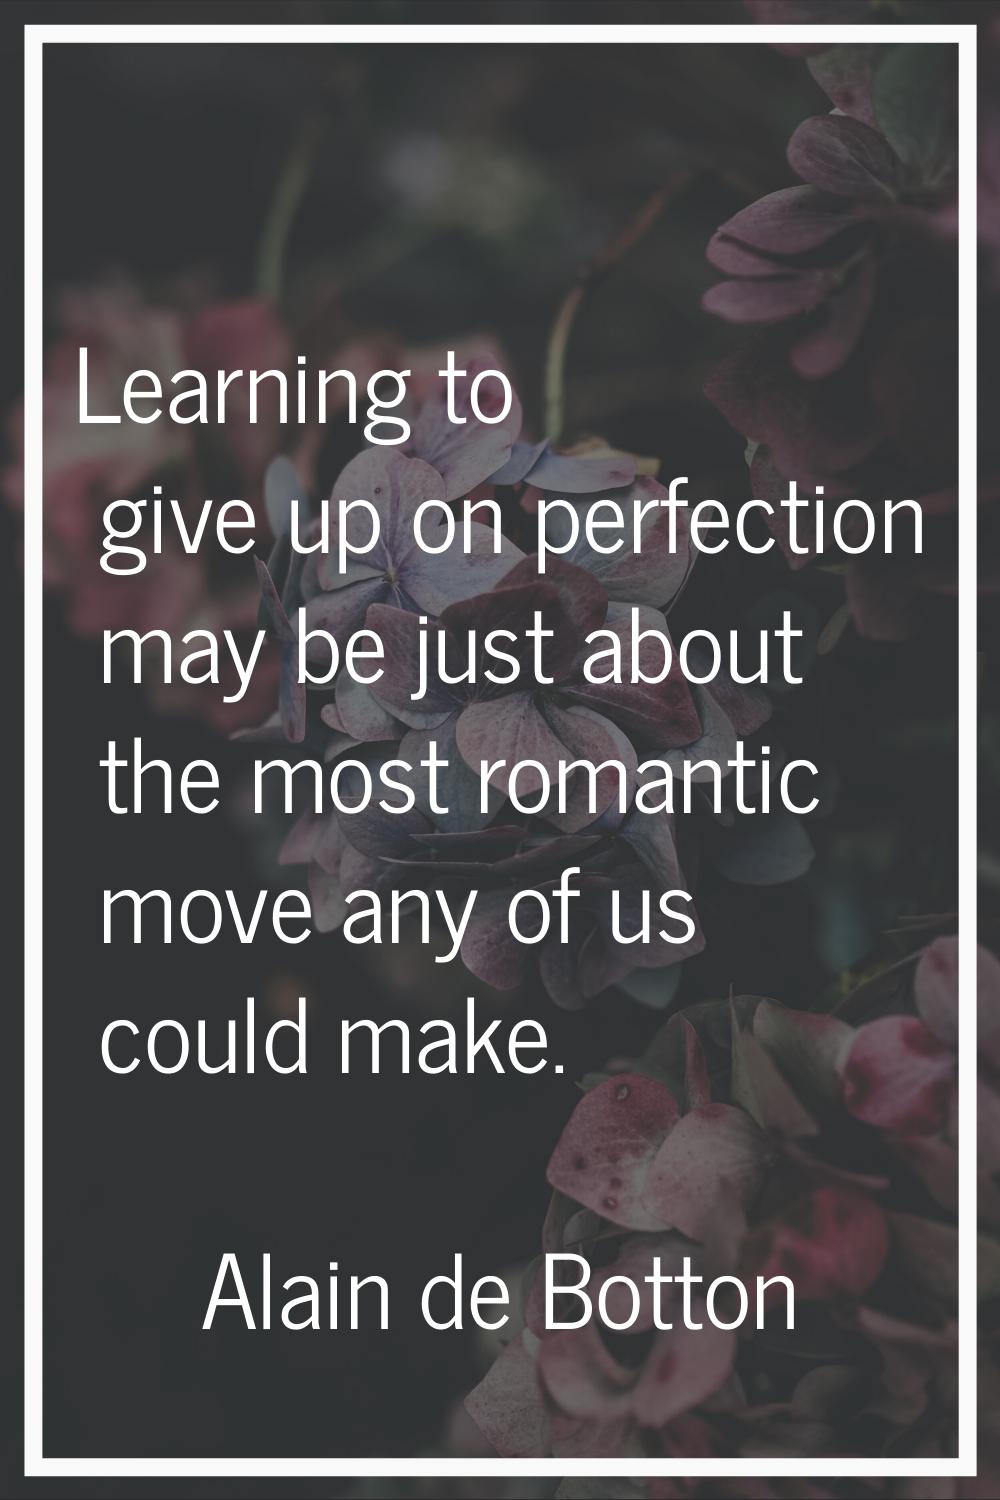 Learning to give up on perfection may be just about the most romantic move any of us could make.